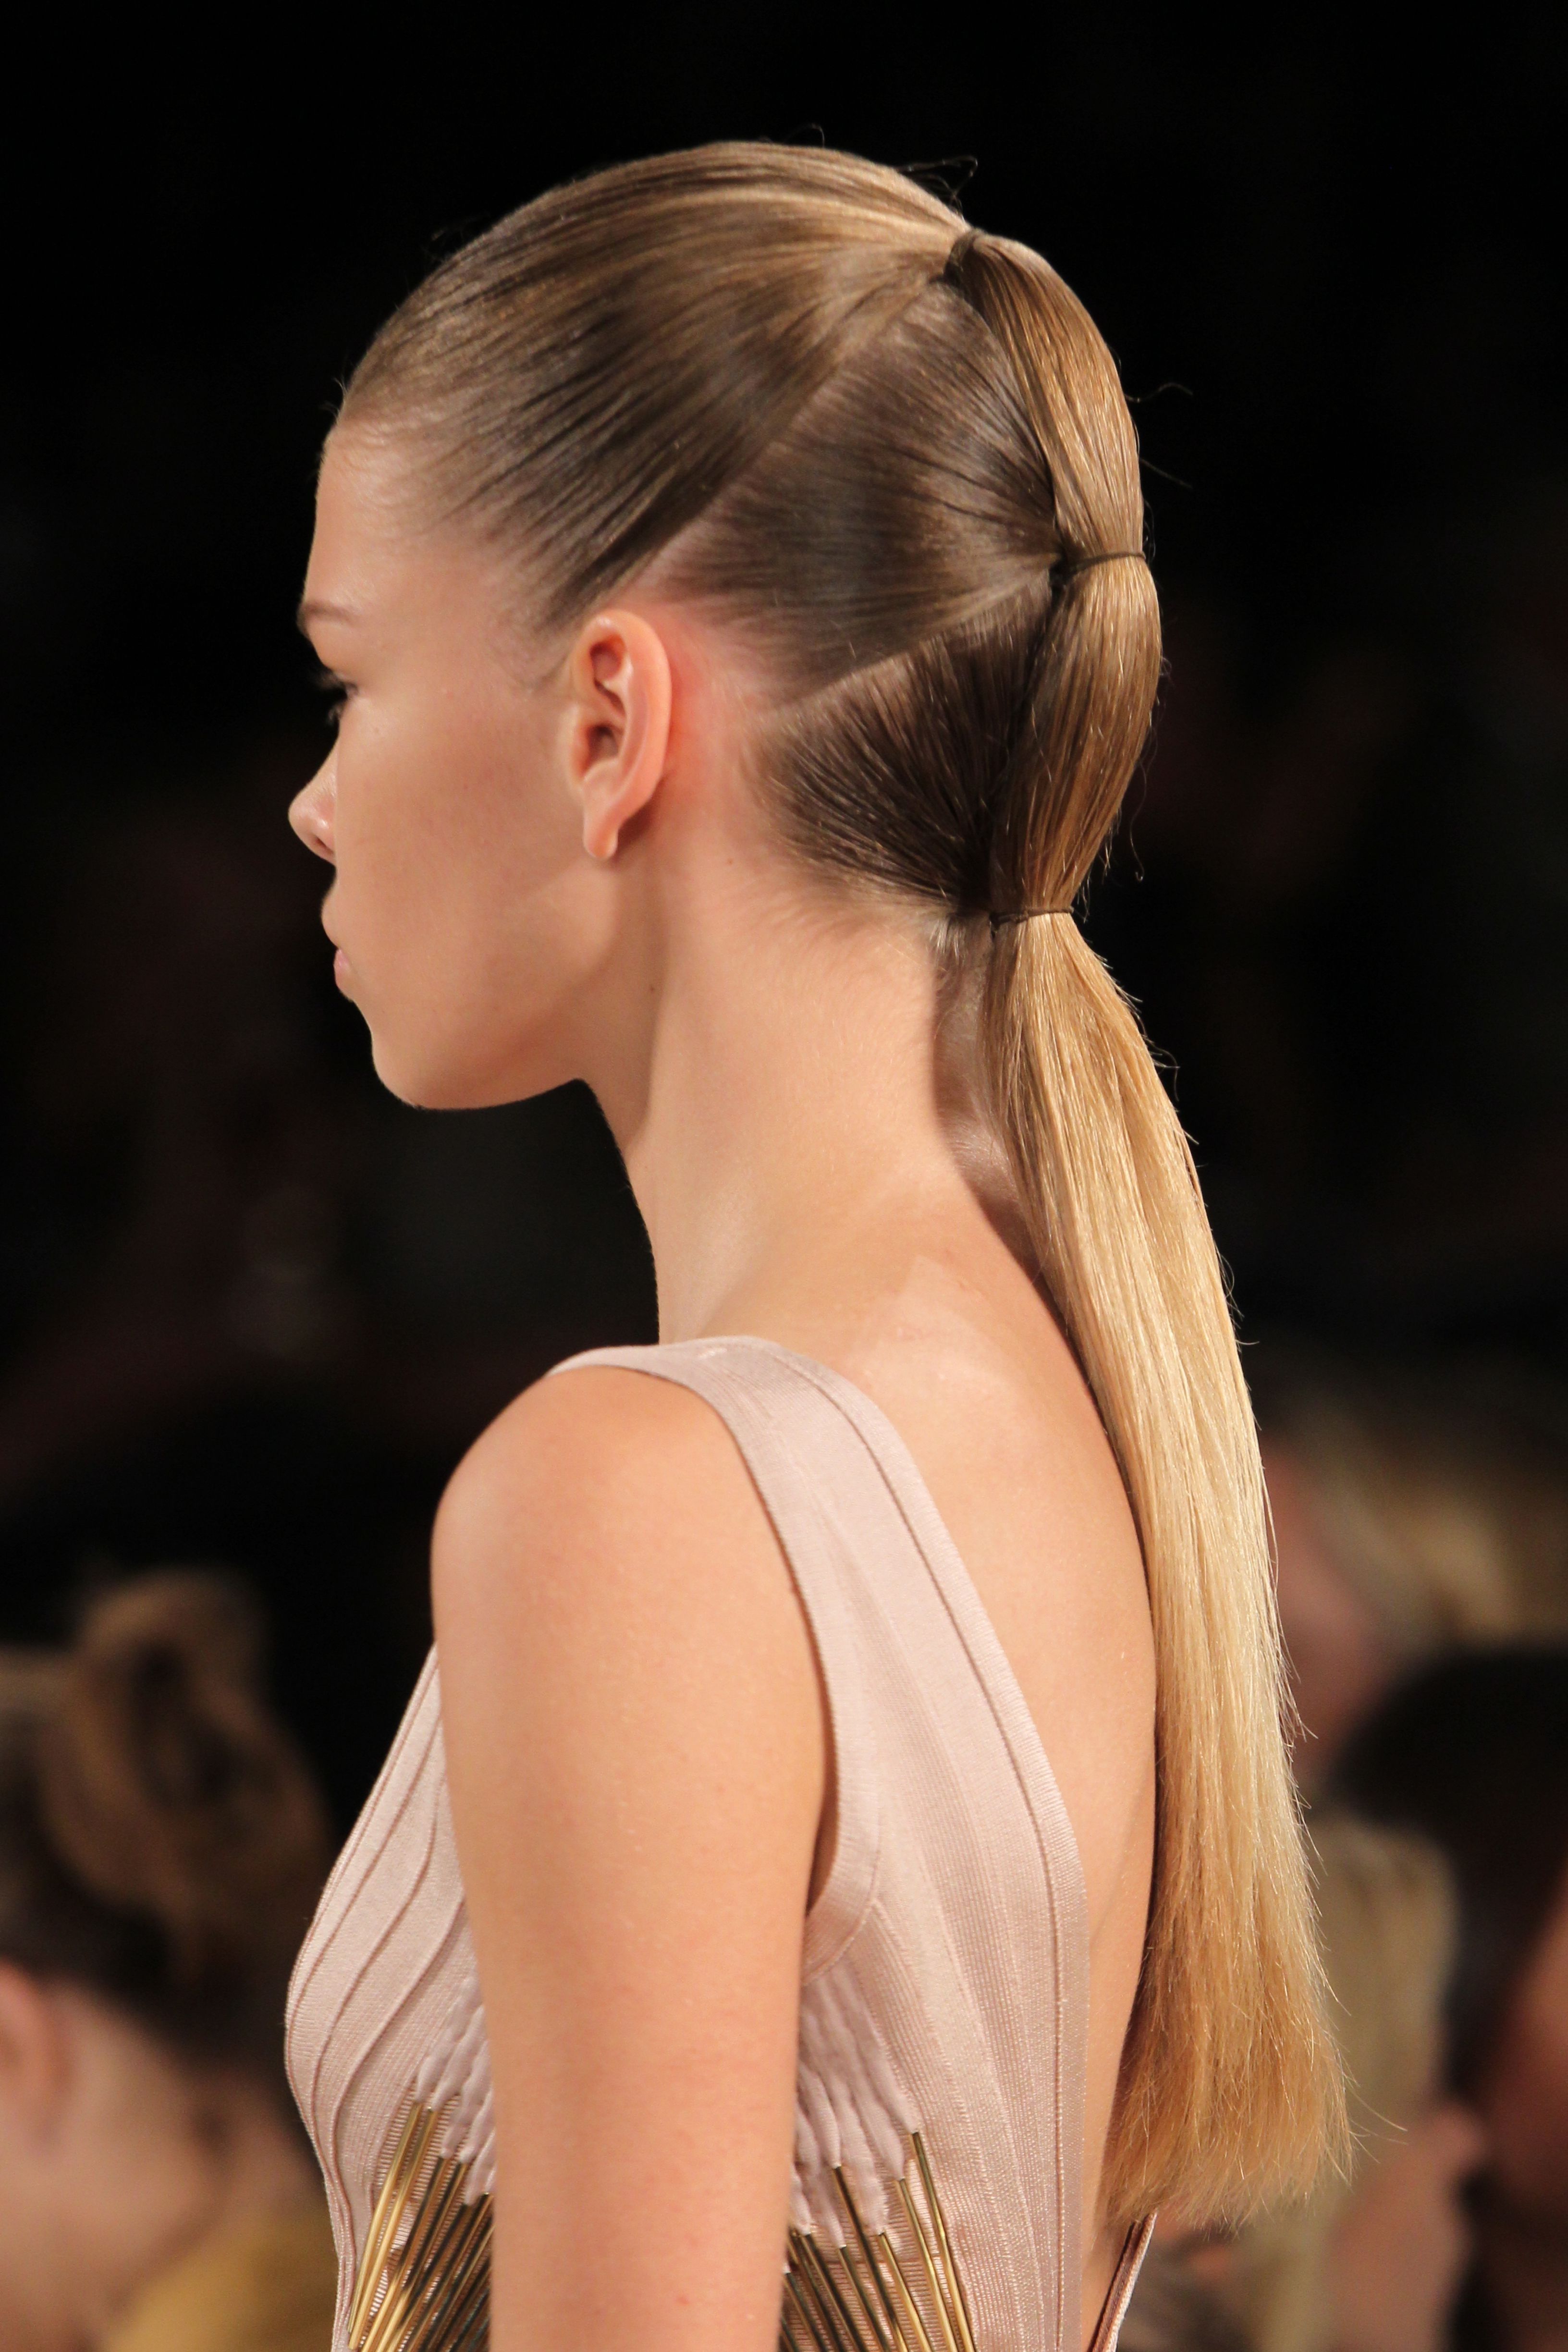 Great Subtle Catwalk Look An Amazing Hairstyle For Fighting The Regarding 2018 Hot High Rebellious Ponytail Hairstyles (Gallery 1 of 20)